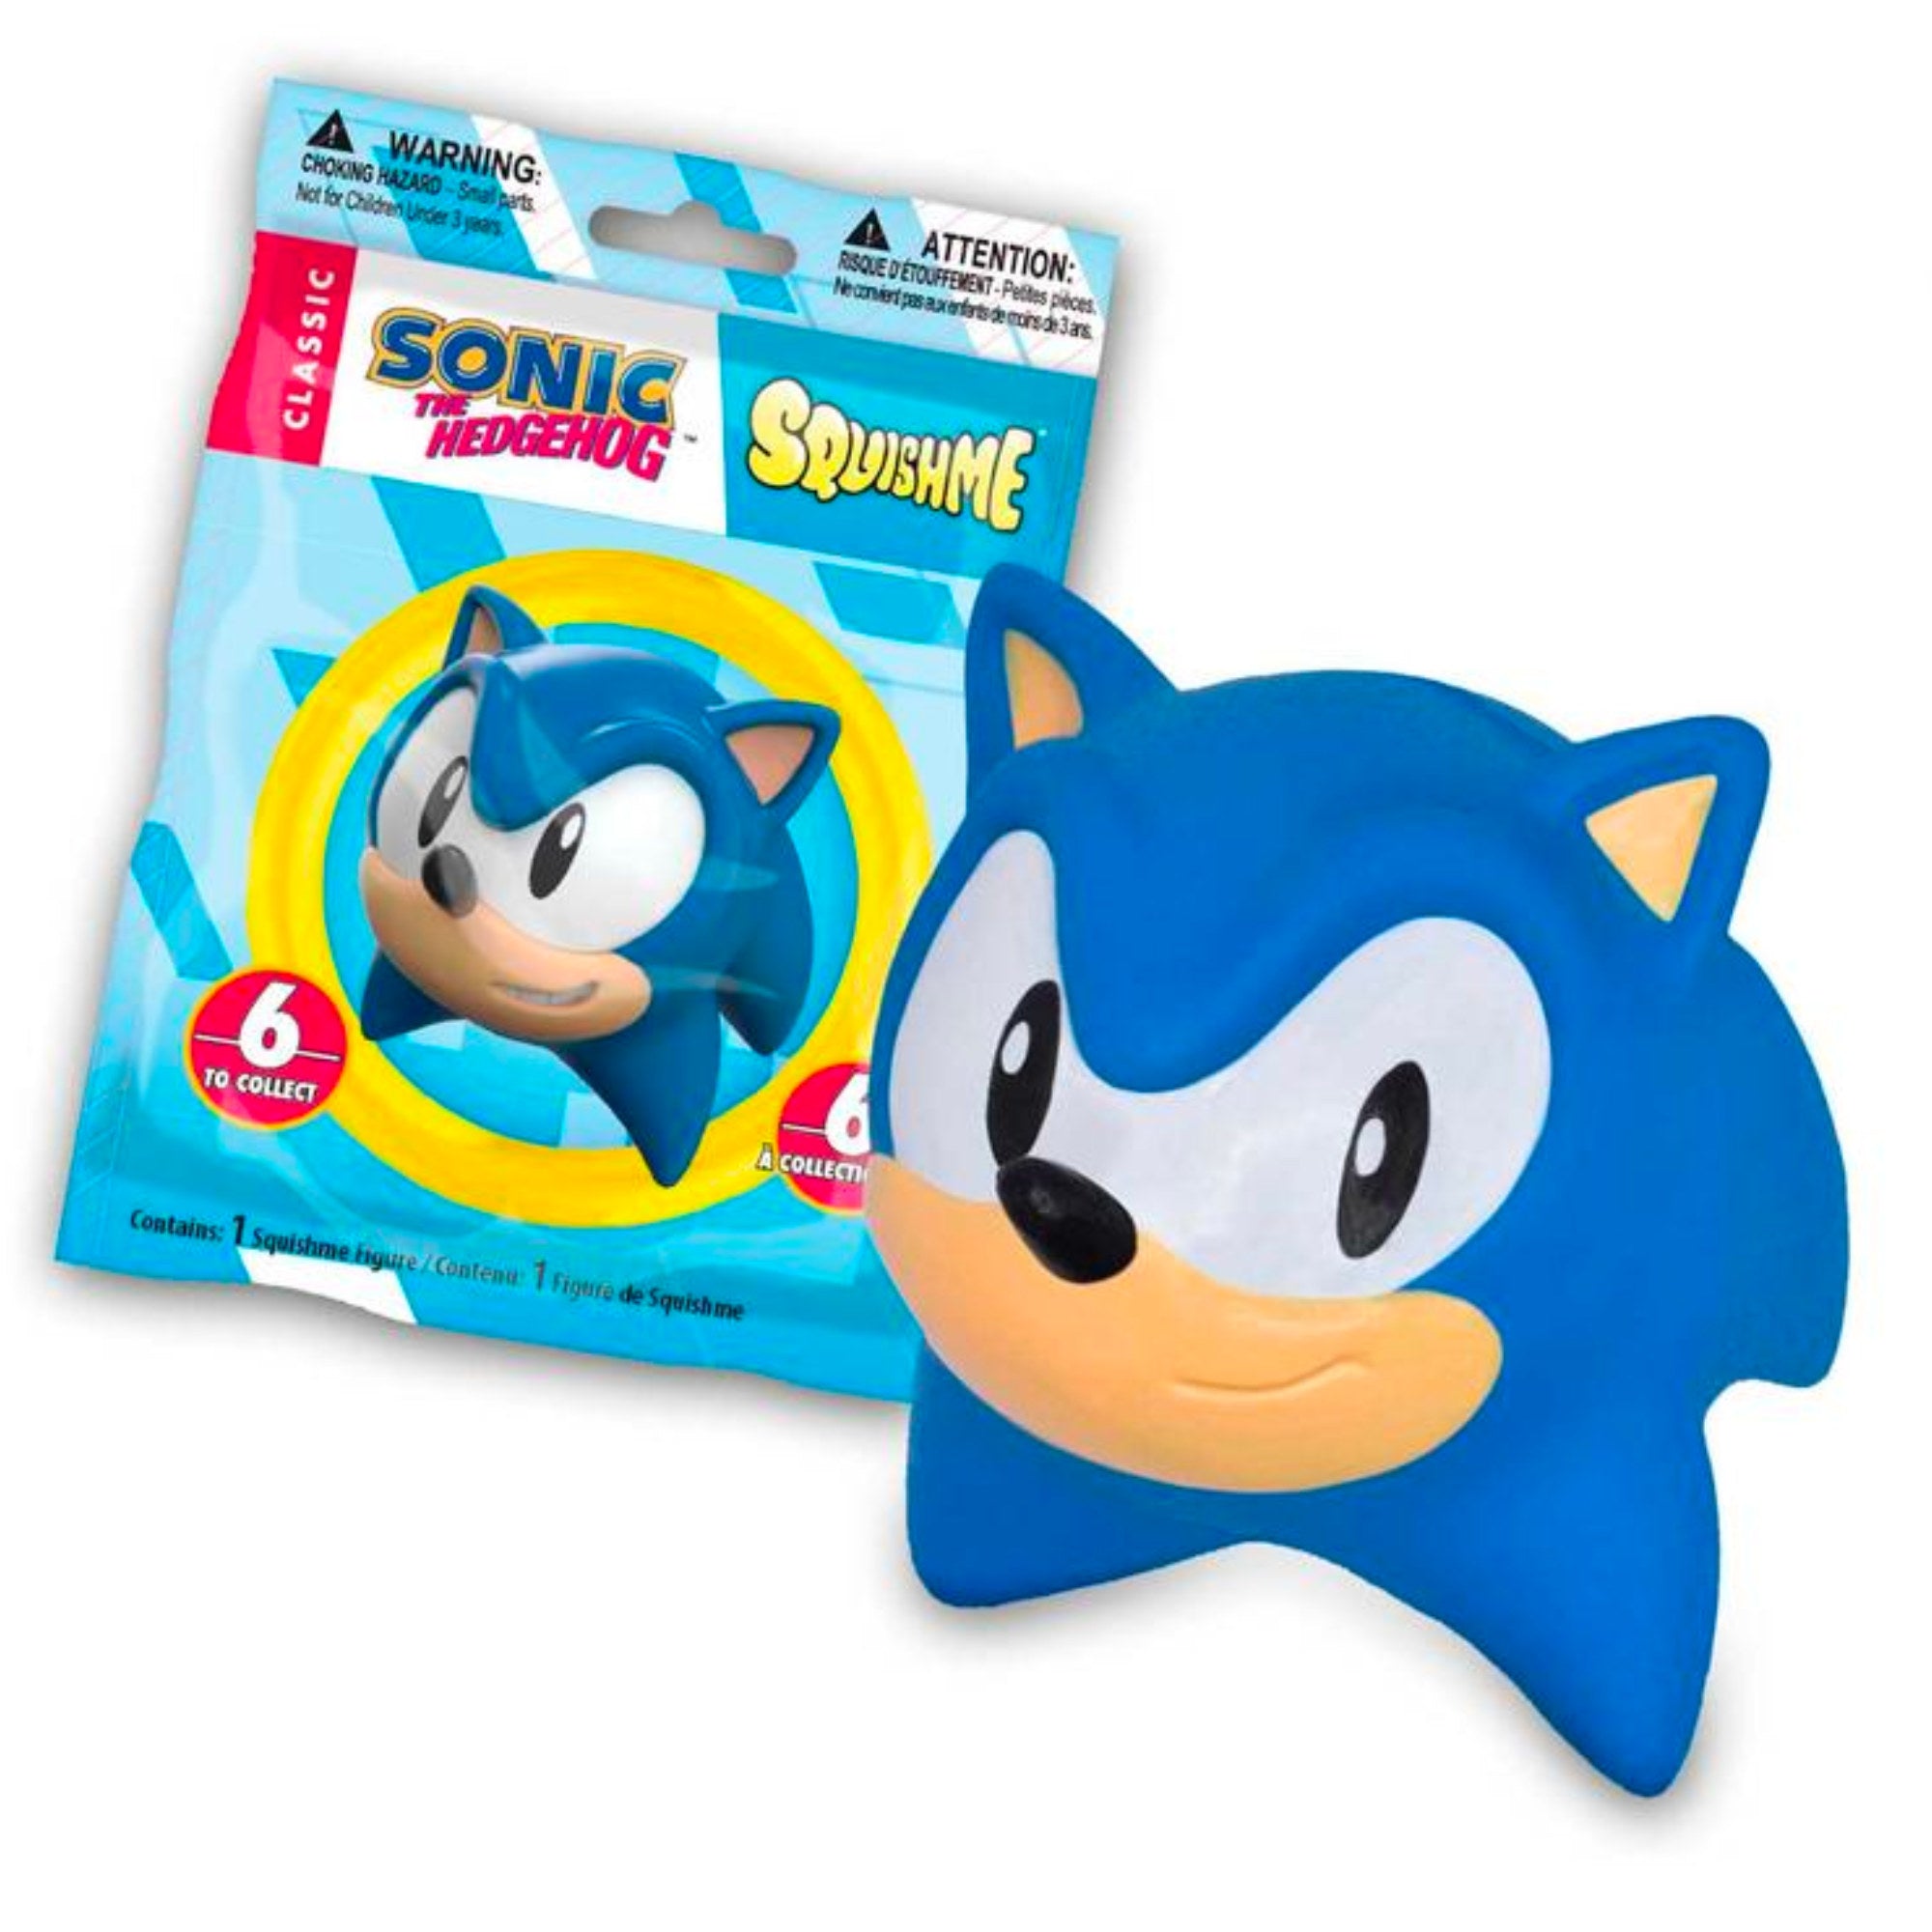 Sonic the Hedgehog SquishMe Mystery Figures